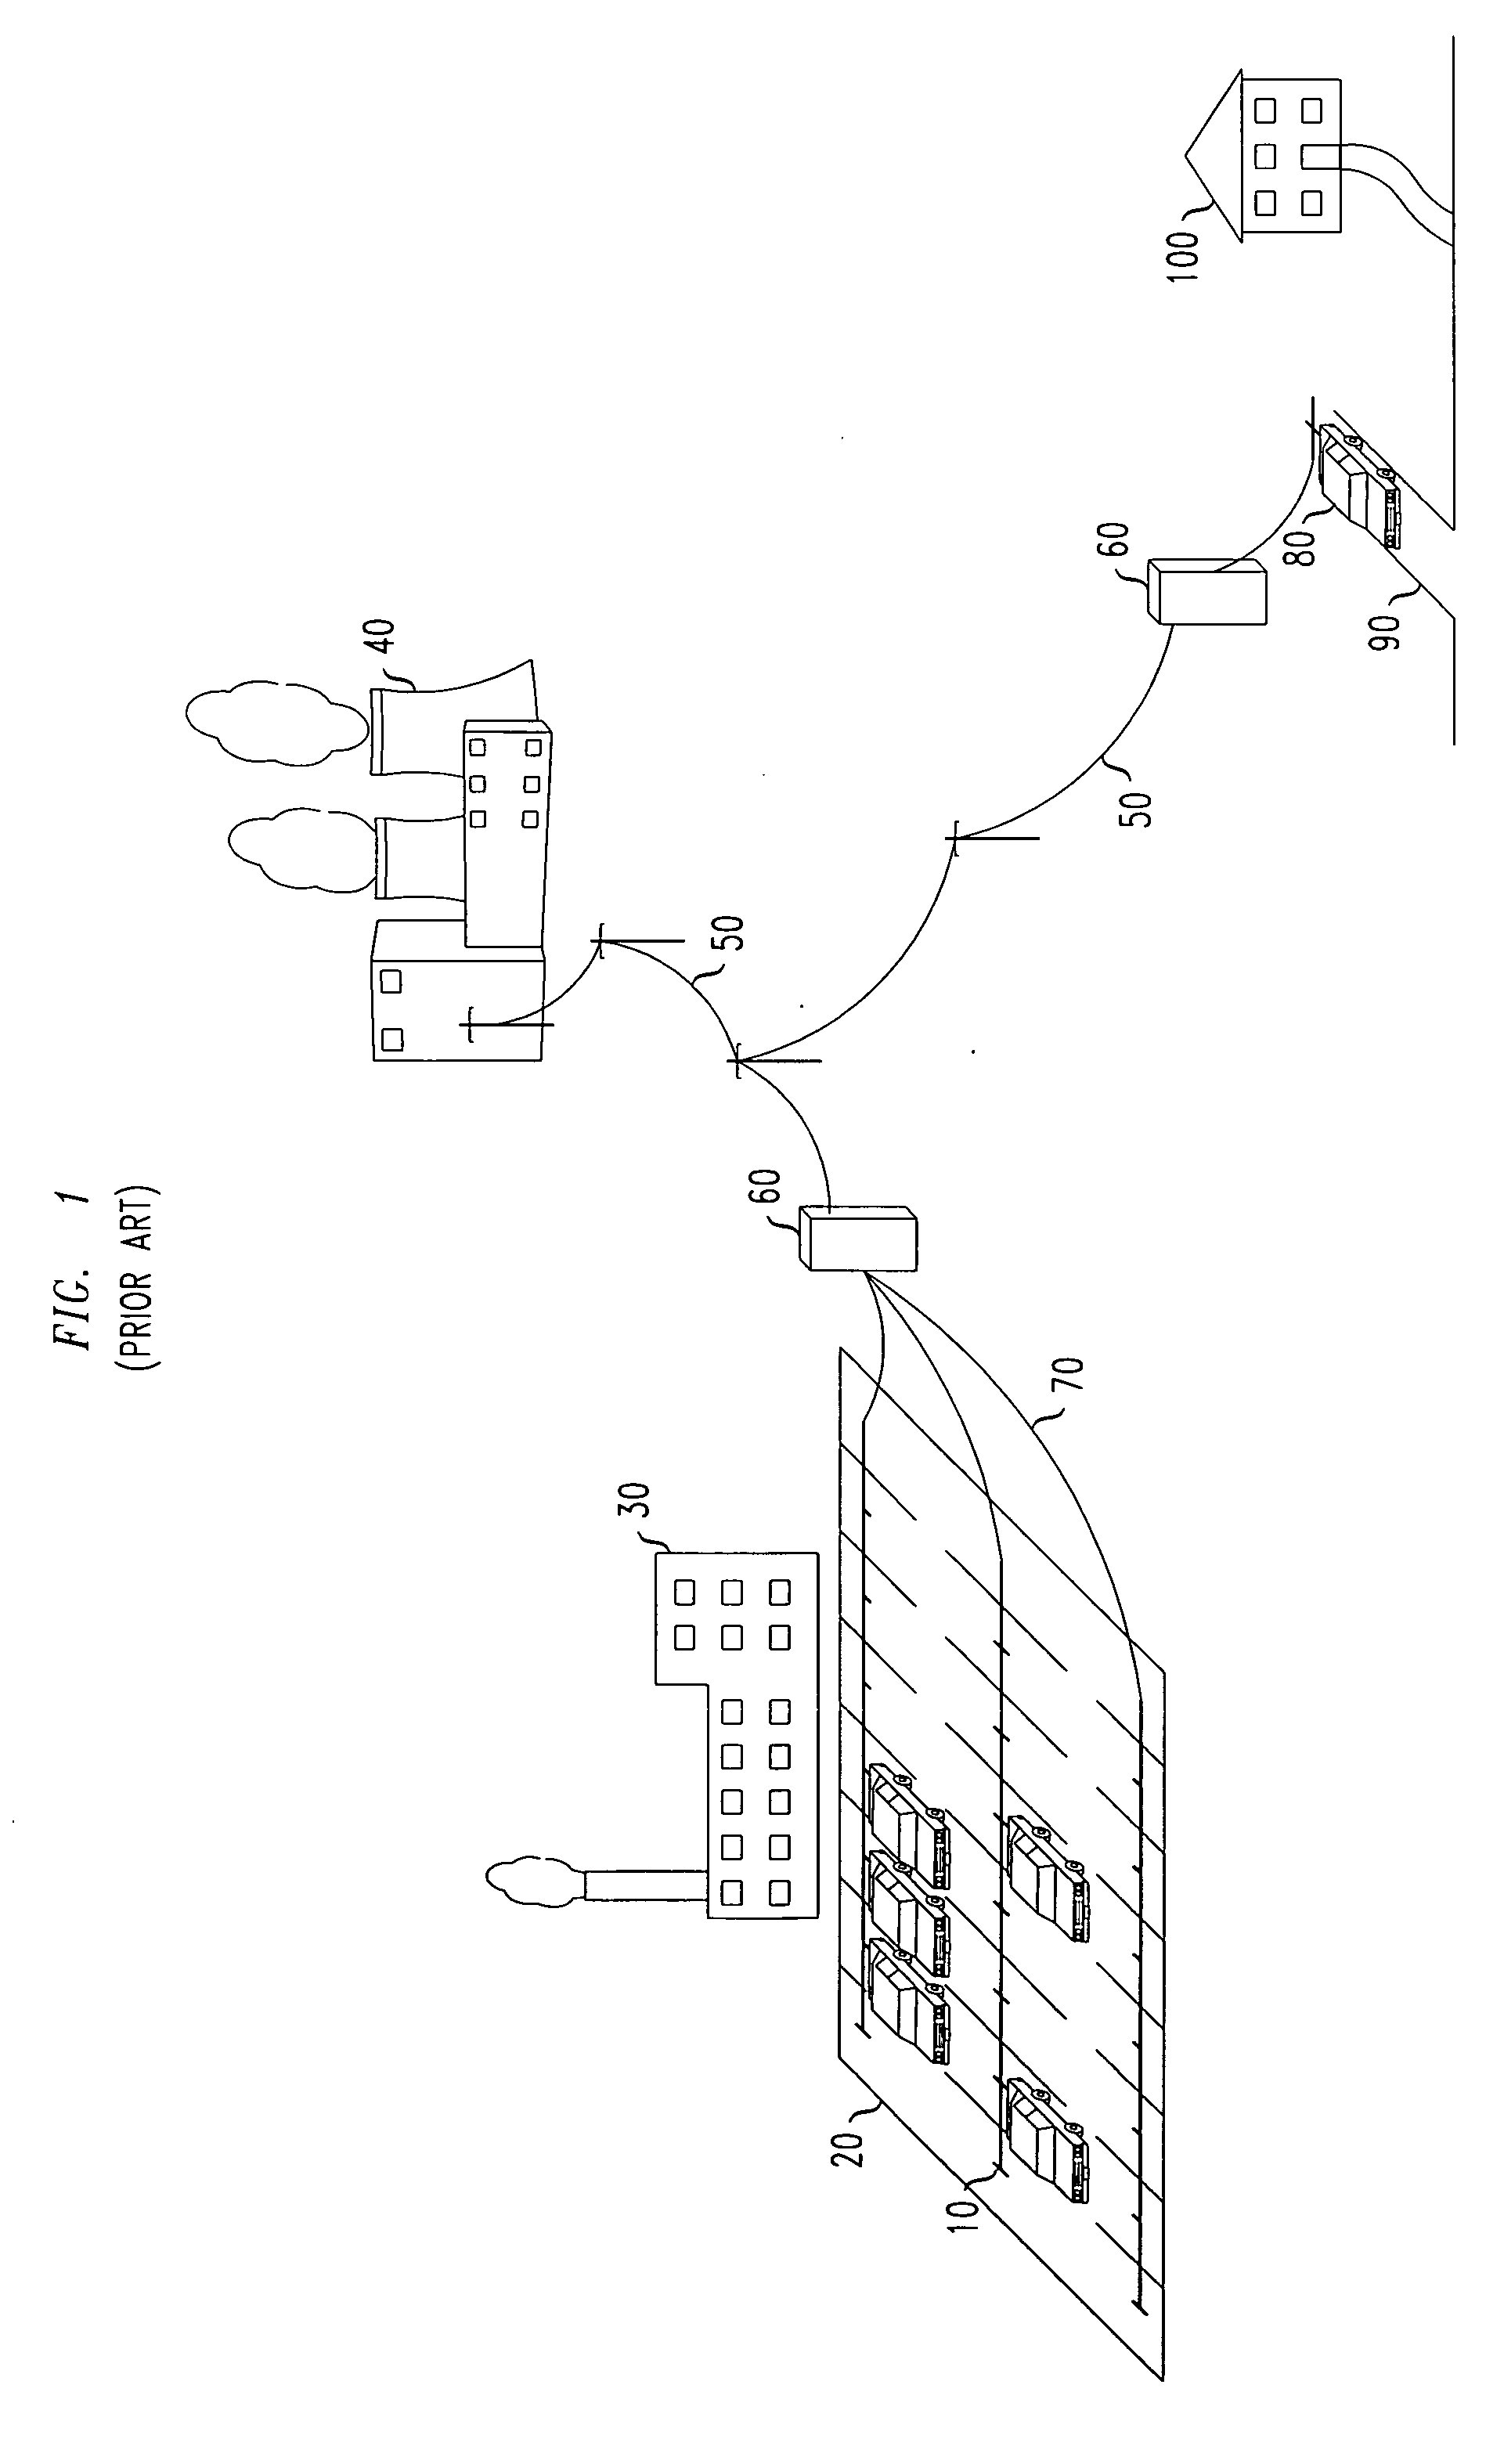 Method and apparatus of stored energy management in battery powered vehicles